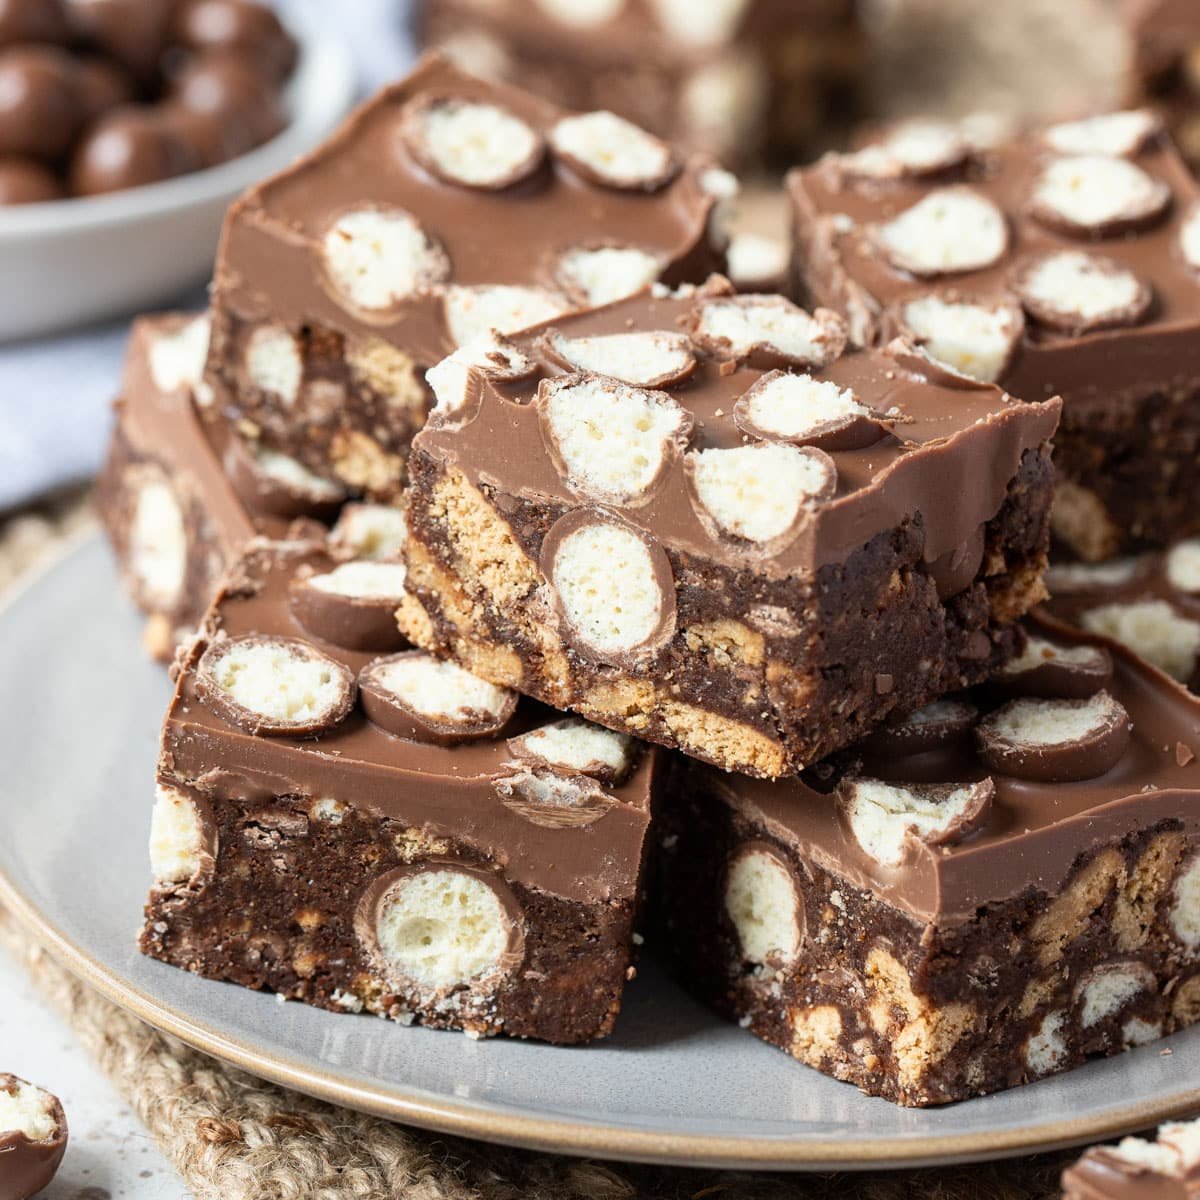 https://www.thecookingcollective.com.au/wp-content/uploads/2022/10/maltesers-slice-4.jpg